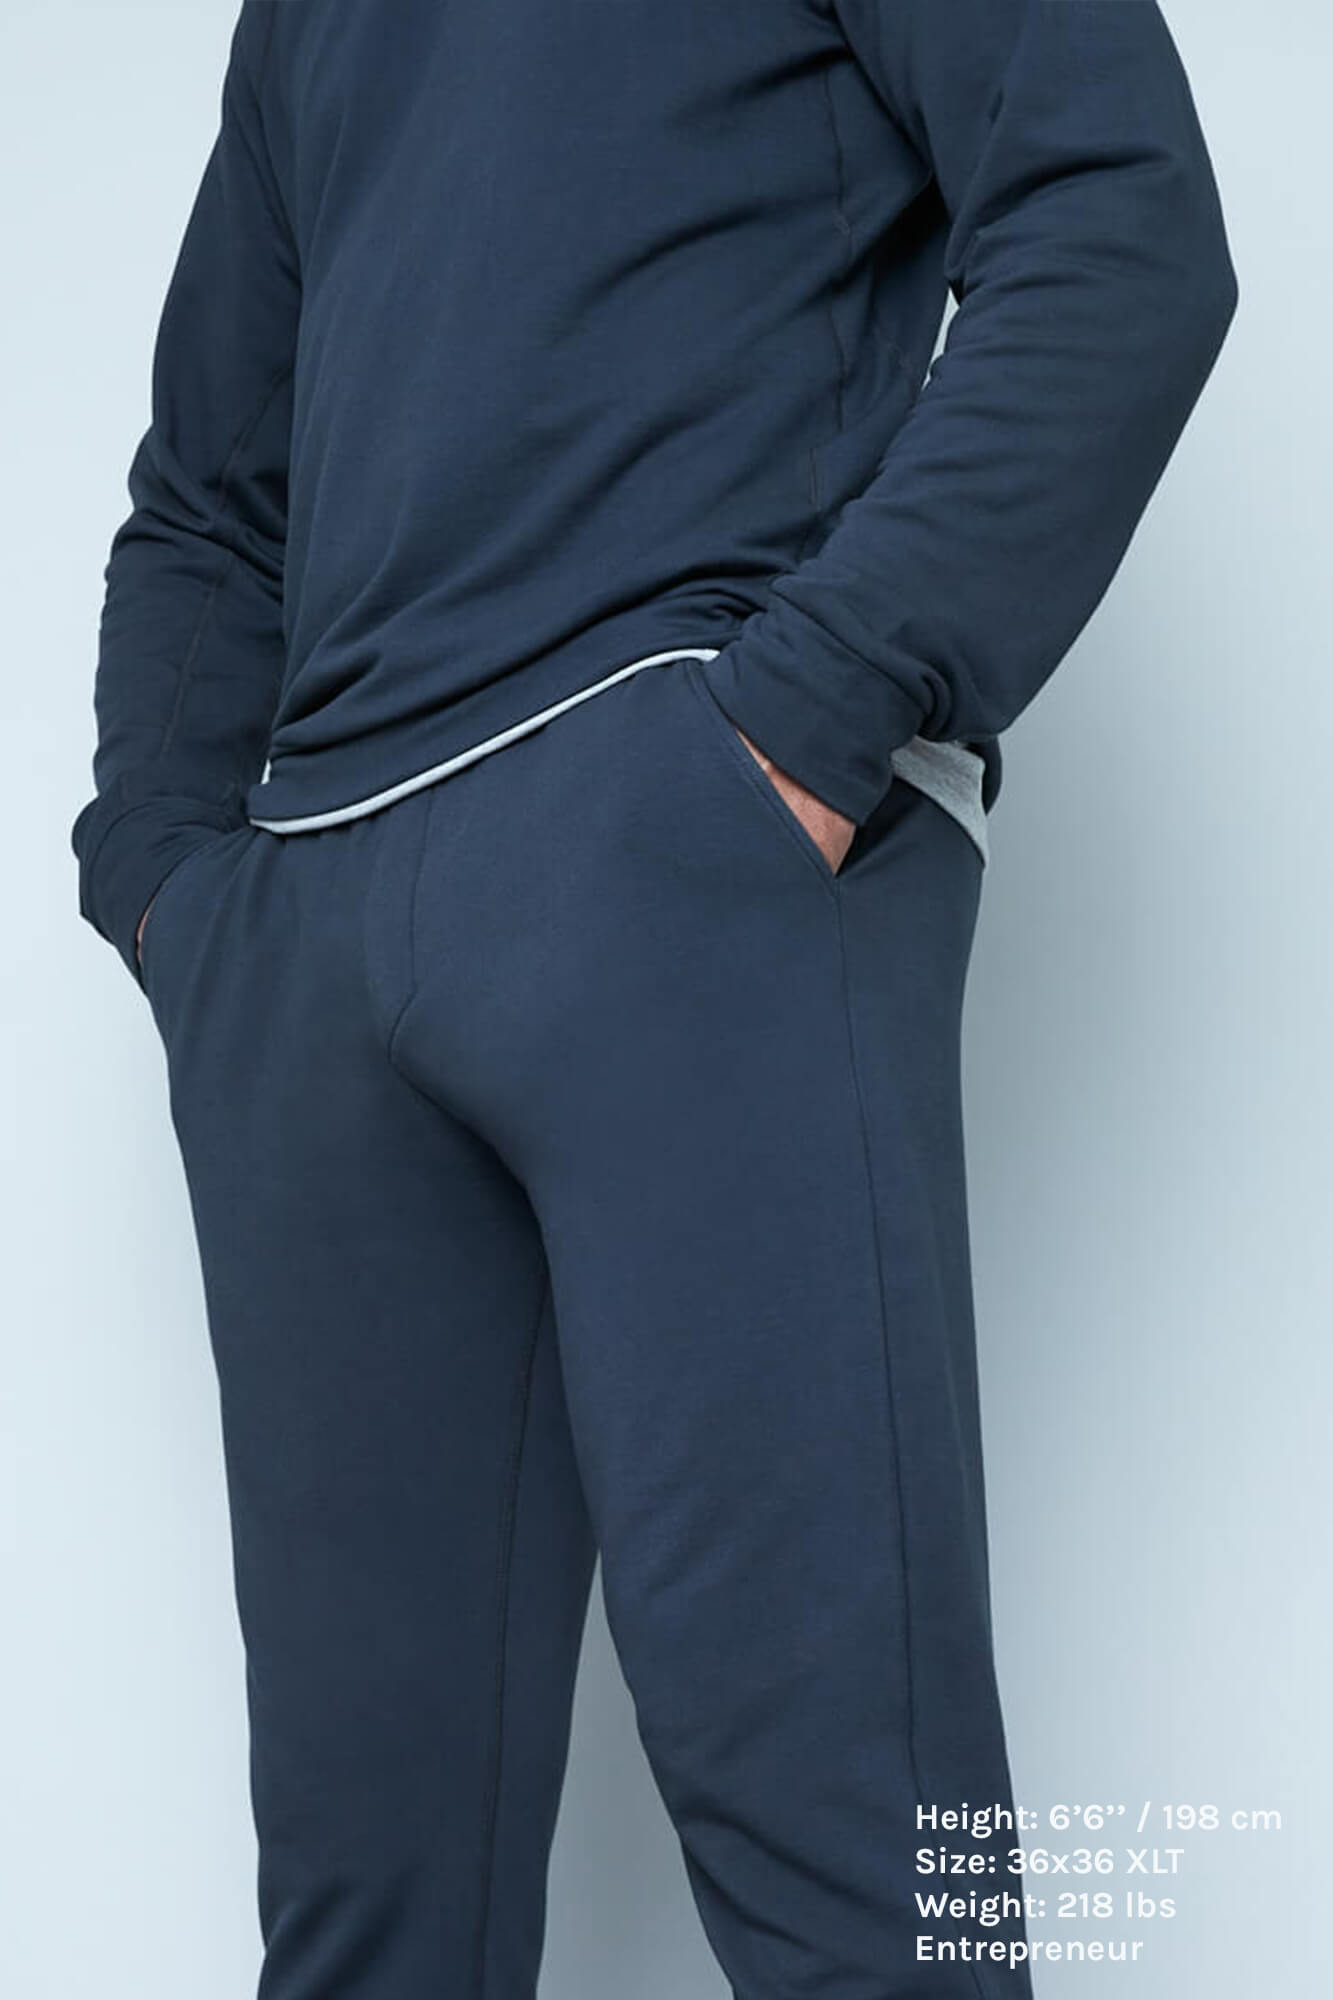 Pants for tall men in grey by Navas Lab. The perfect mens tall joggers for tall guys looking for style and comfort.